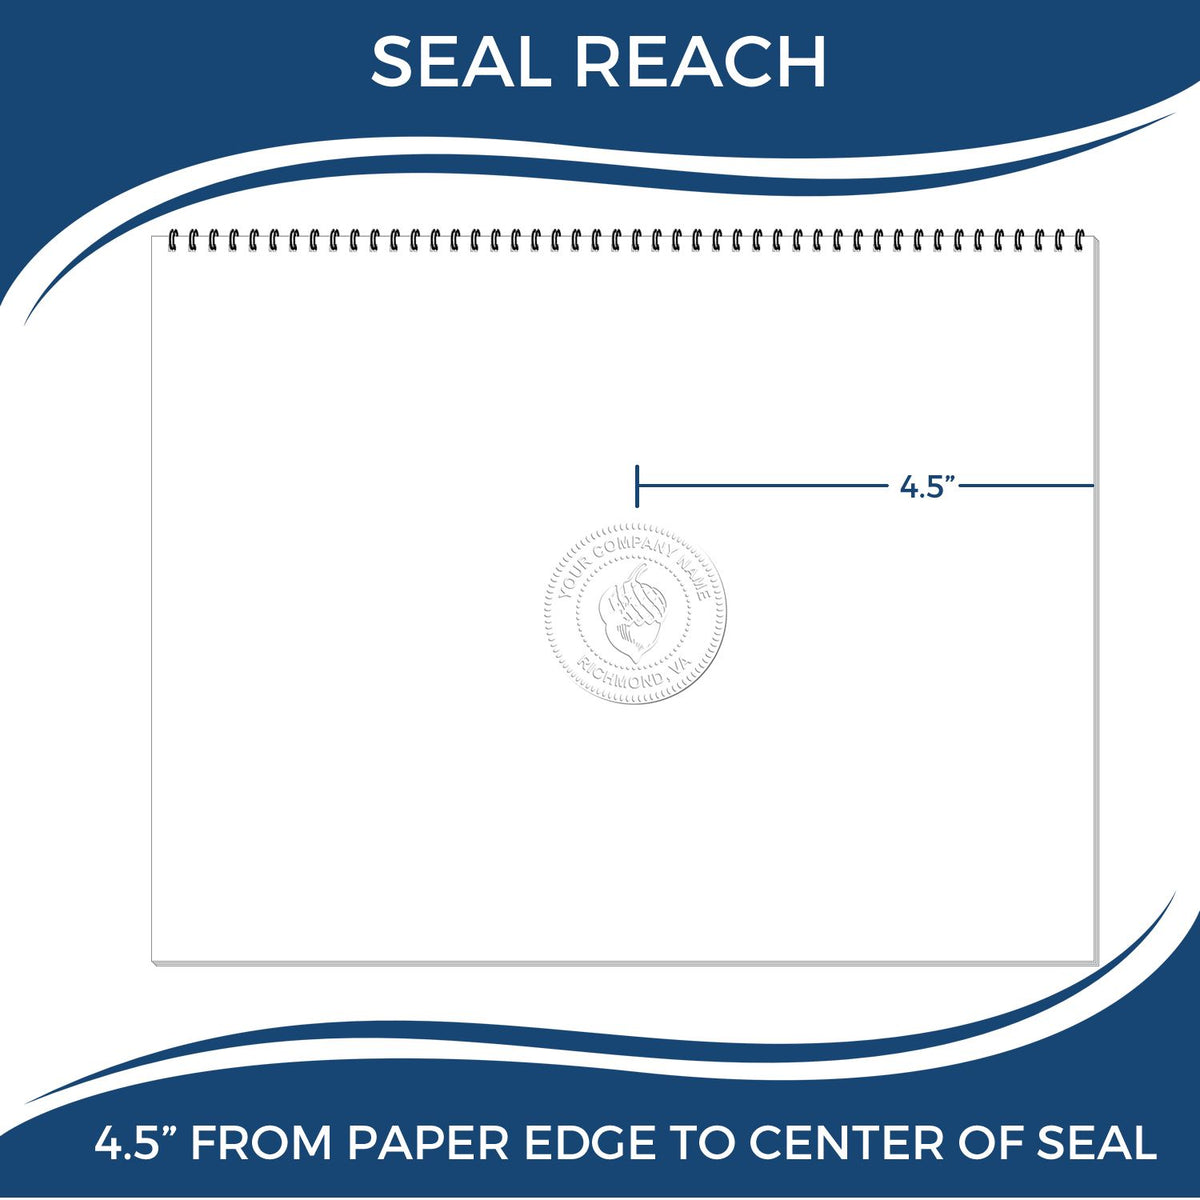 An infographic showing the seal reach which is represented by a ruler and a miniature seal image of the State of Wyoming Extended Long Reach Geologist Seal